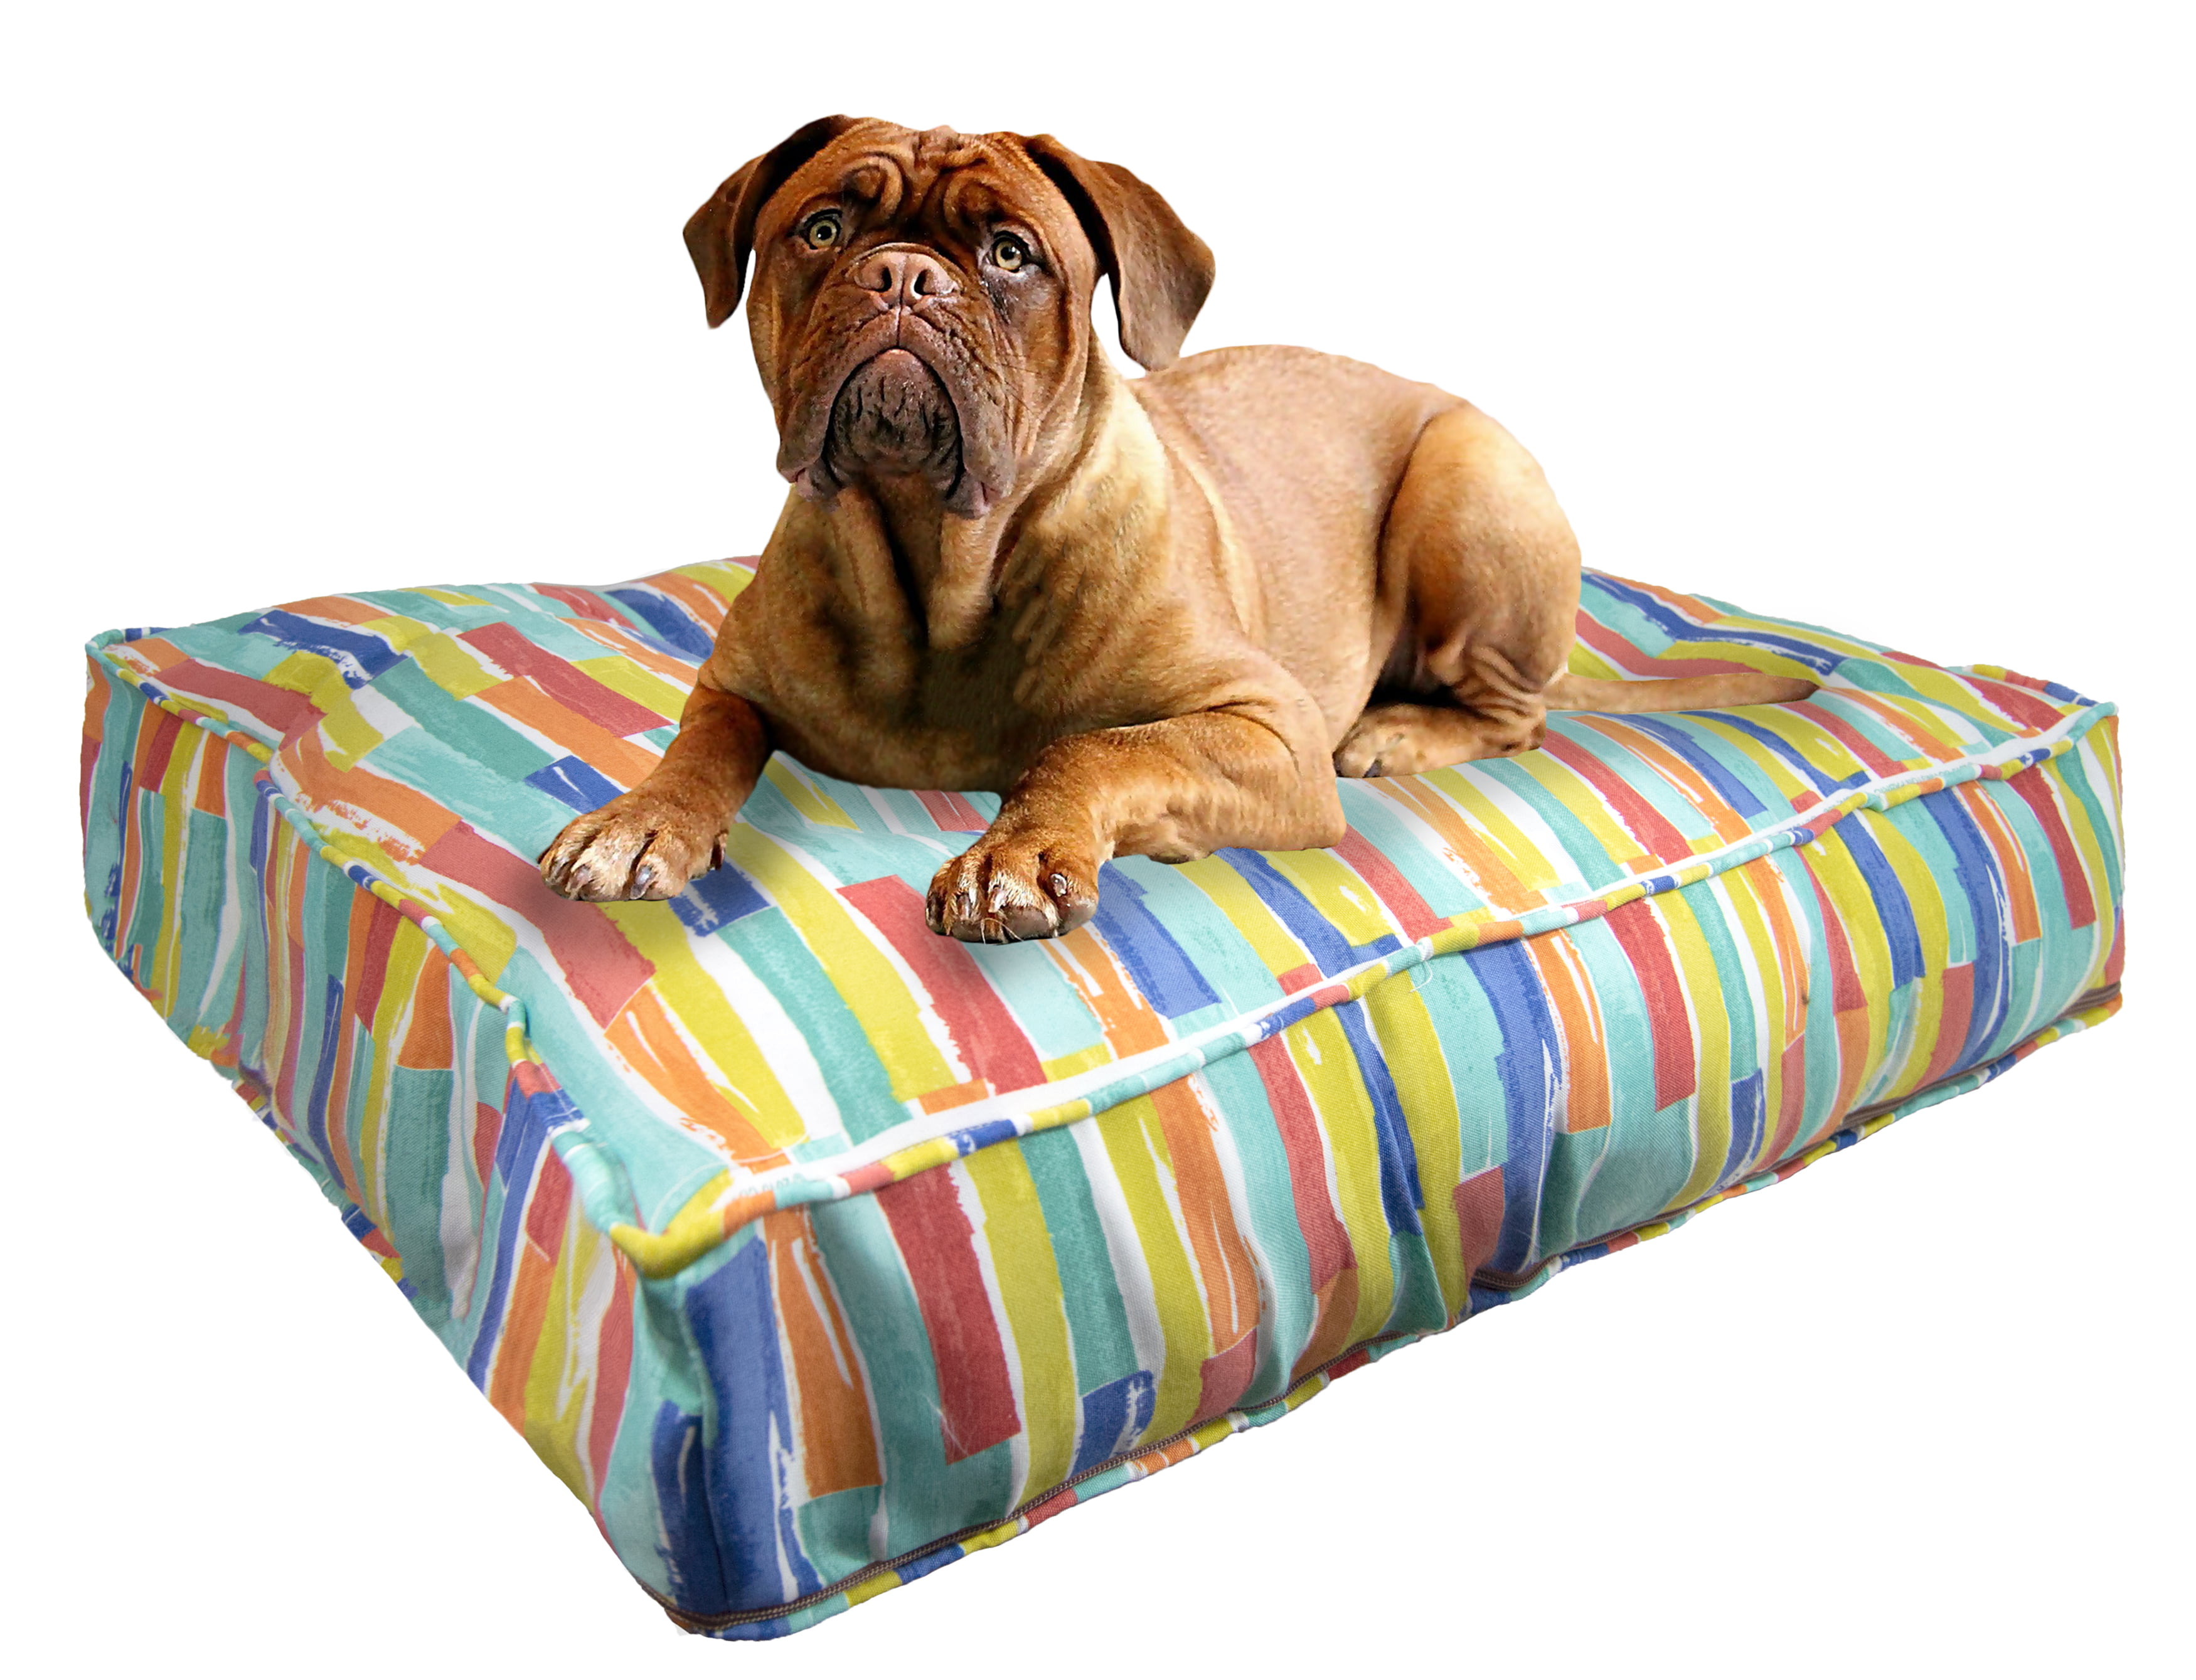 Cozy Up Your Pooch: Top 10 Dog Beds With Covers You Need to Know About ...